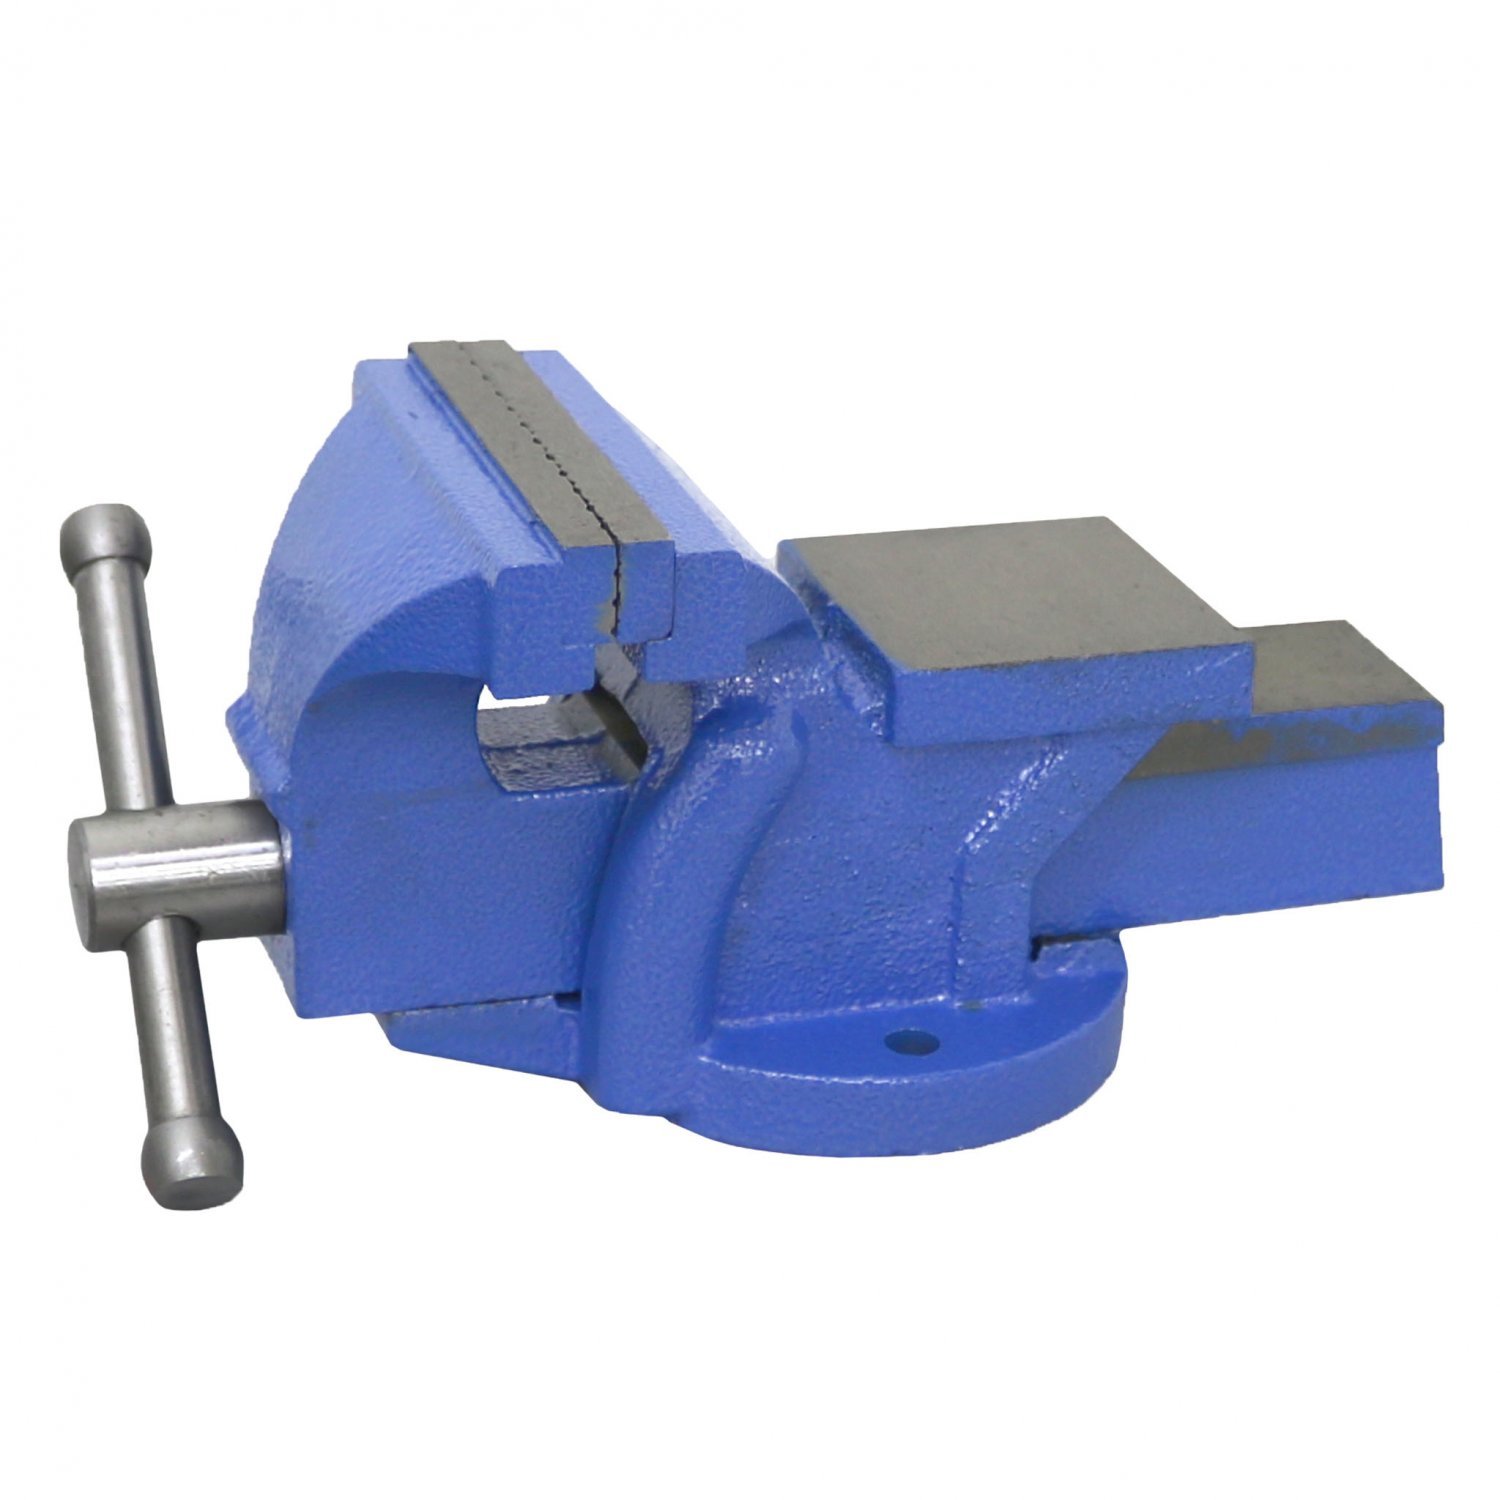 Durable 360° Bench Vice 4 Inch Workshop Clamp Engineers 110mm Jaw Workshop Heavy Duty Yosoo Bench Vise